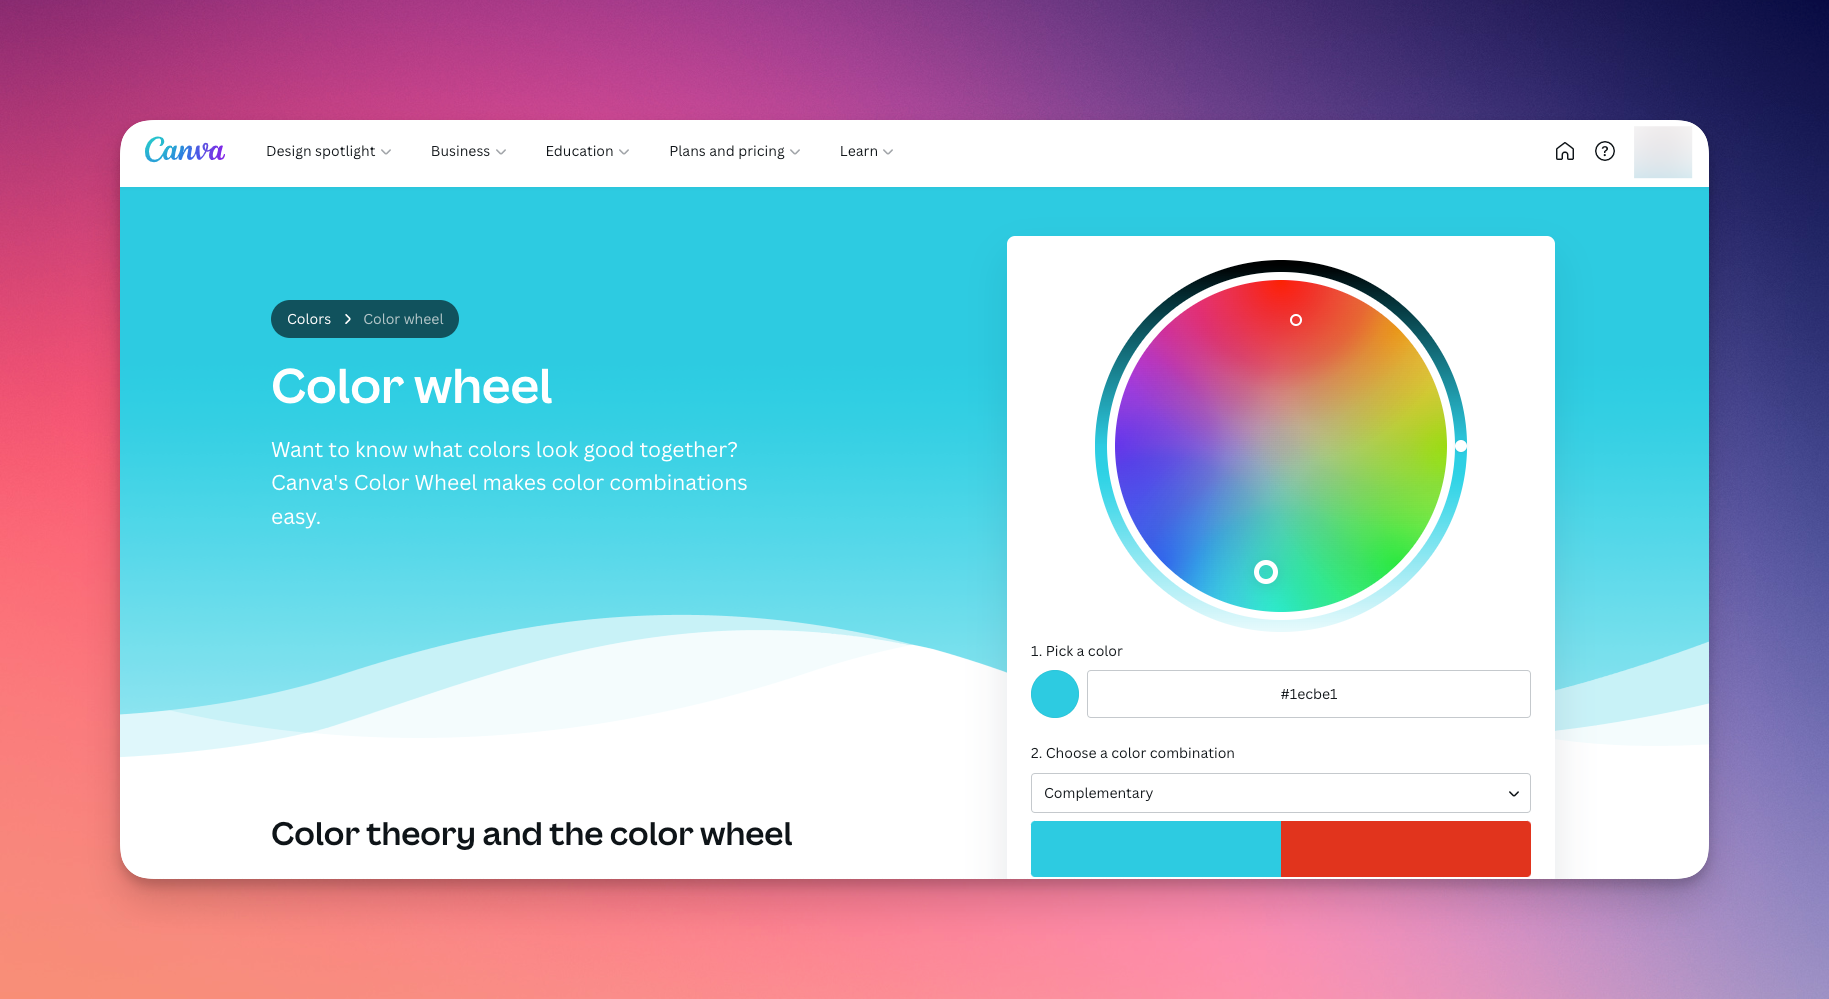 Remote.tools shows canva color wheel tool that can help you with creating Instagram color palette for your Instagram feed